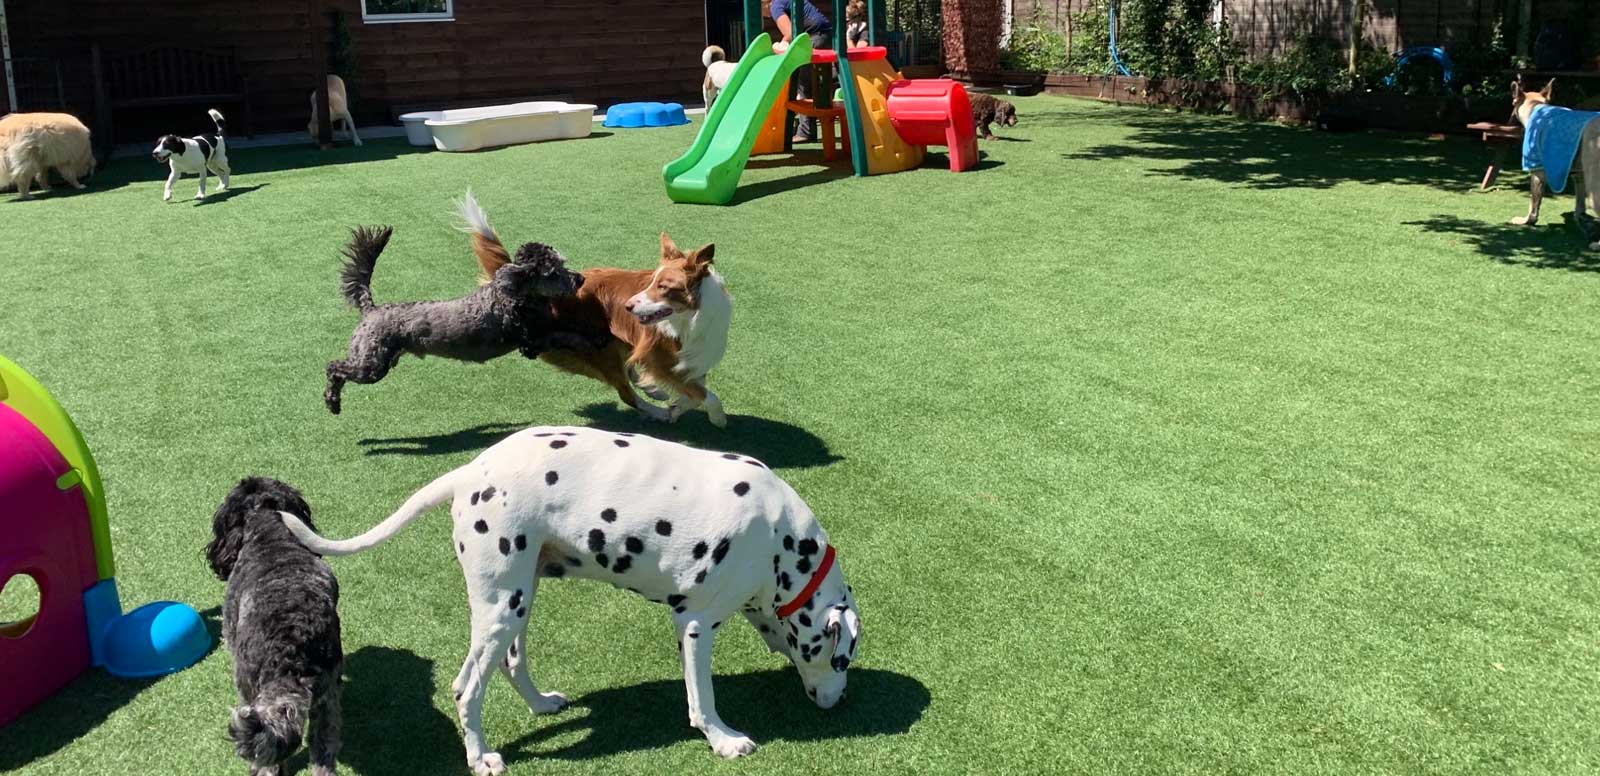 Dogs happily playing at Bella Paws dog daycare centre in Essex